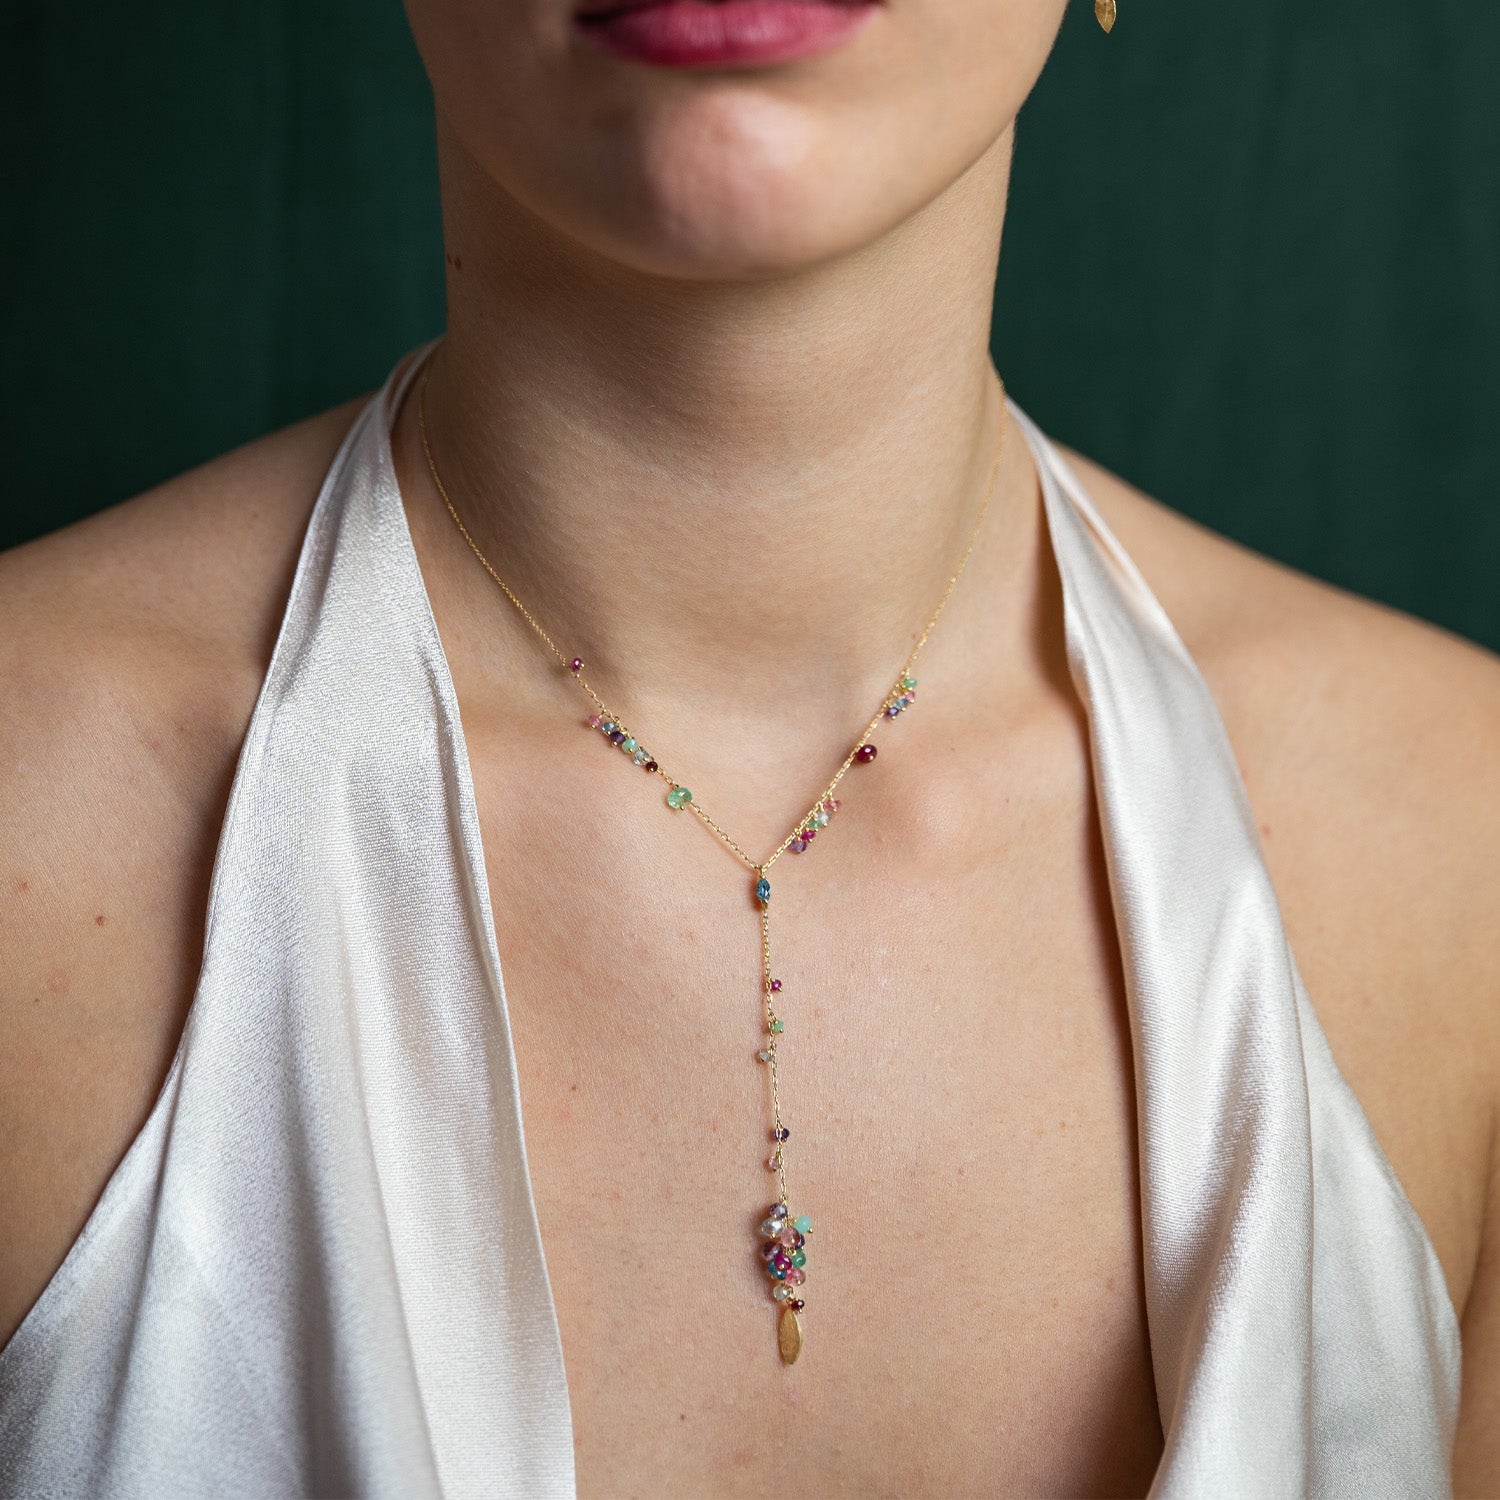 romantic world y shaped blue topaz necklace on model